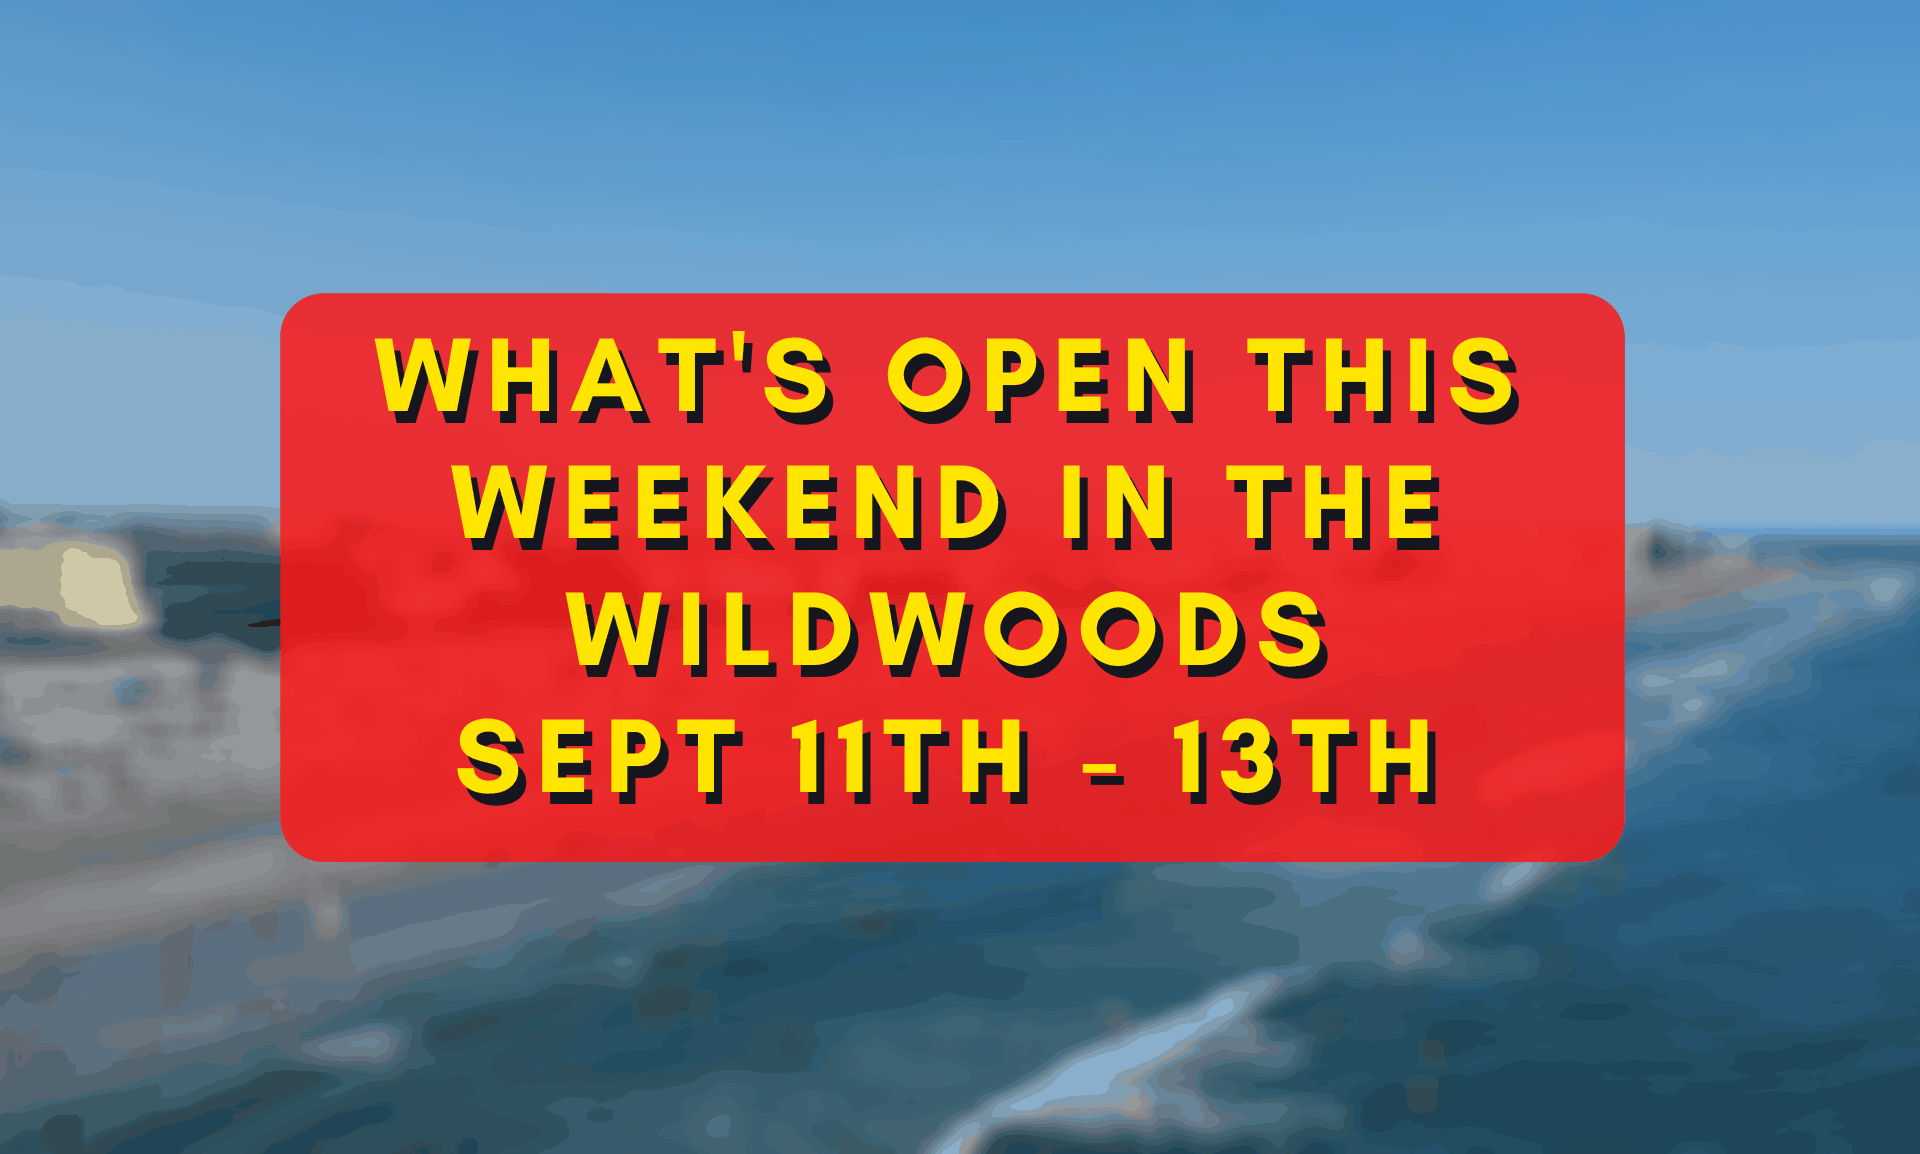 What’s Open This Weekend In The Wildwoods Sept 11th - 13th